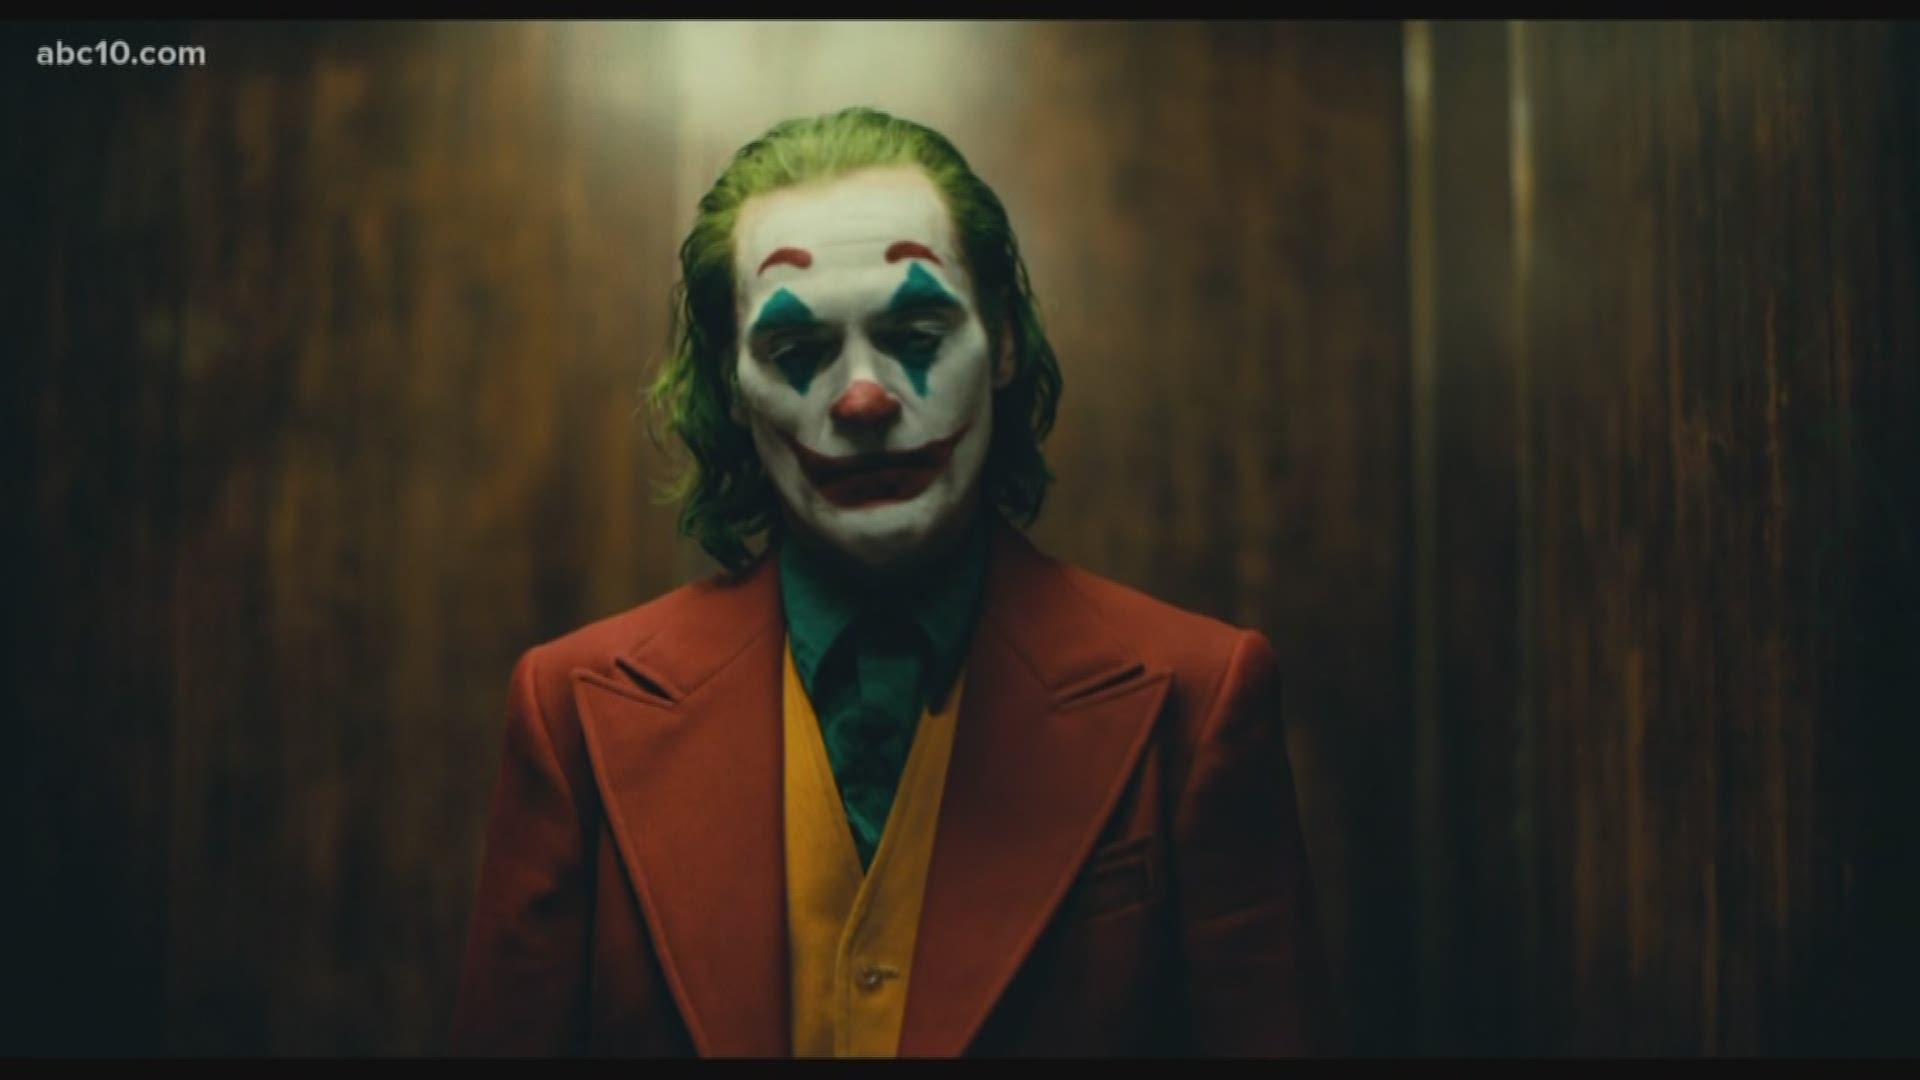 Some movie theatre chains are warning parents against bringing their kids to see the new 'Joker' movie starring Joaquin Phoenix.